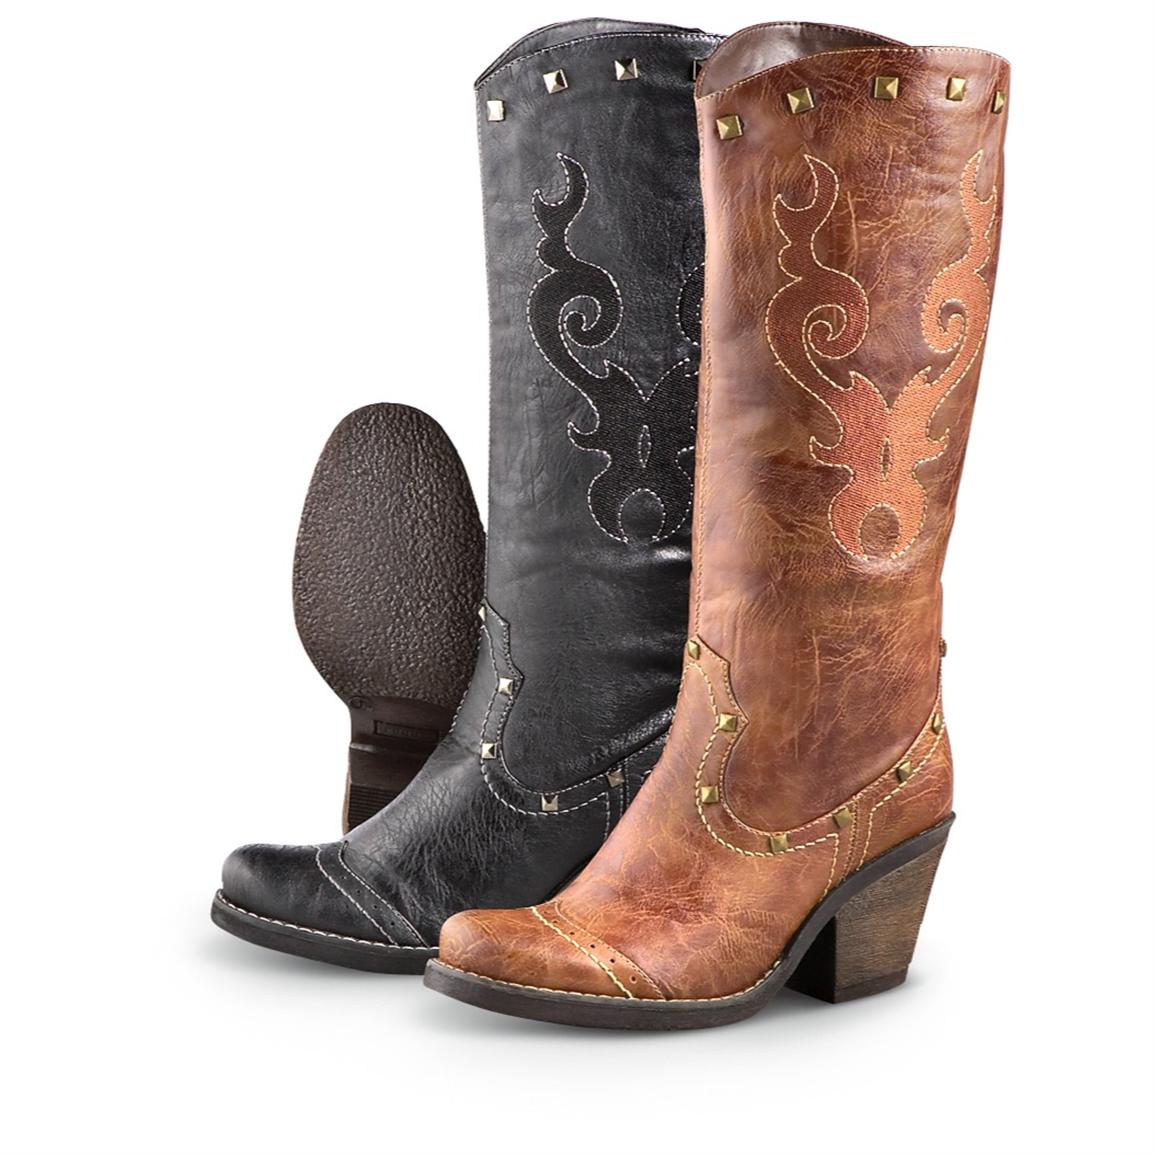 Women's Apres New Country Boots - 207259, Western & Cowboy Boots at